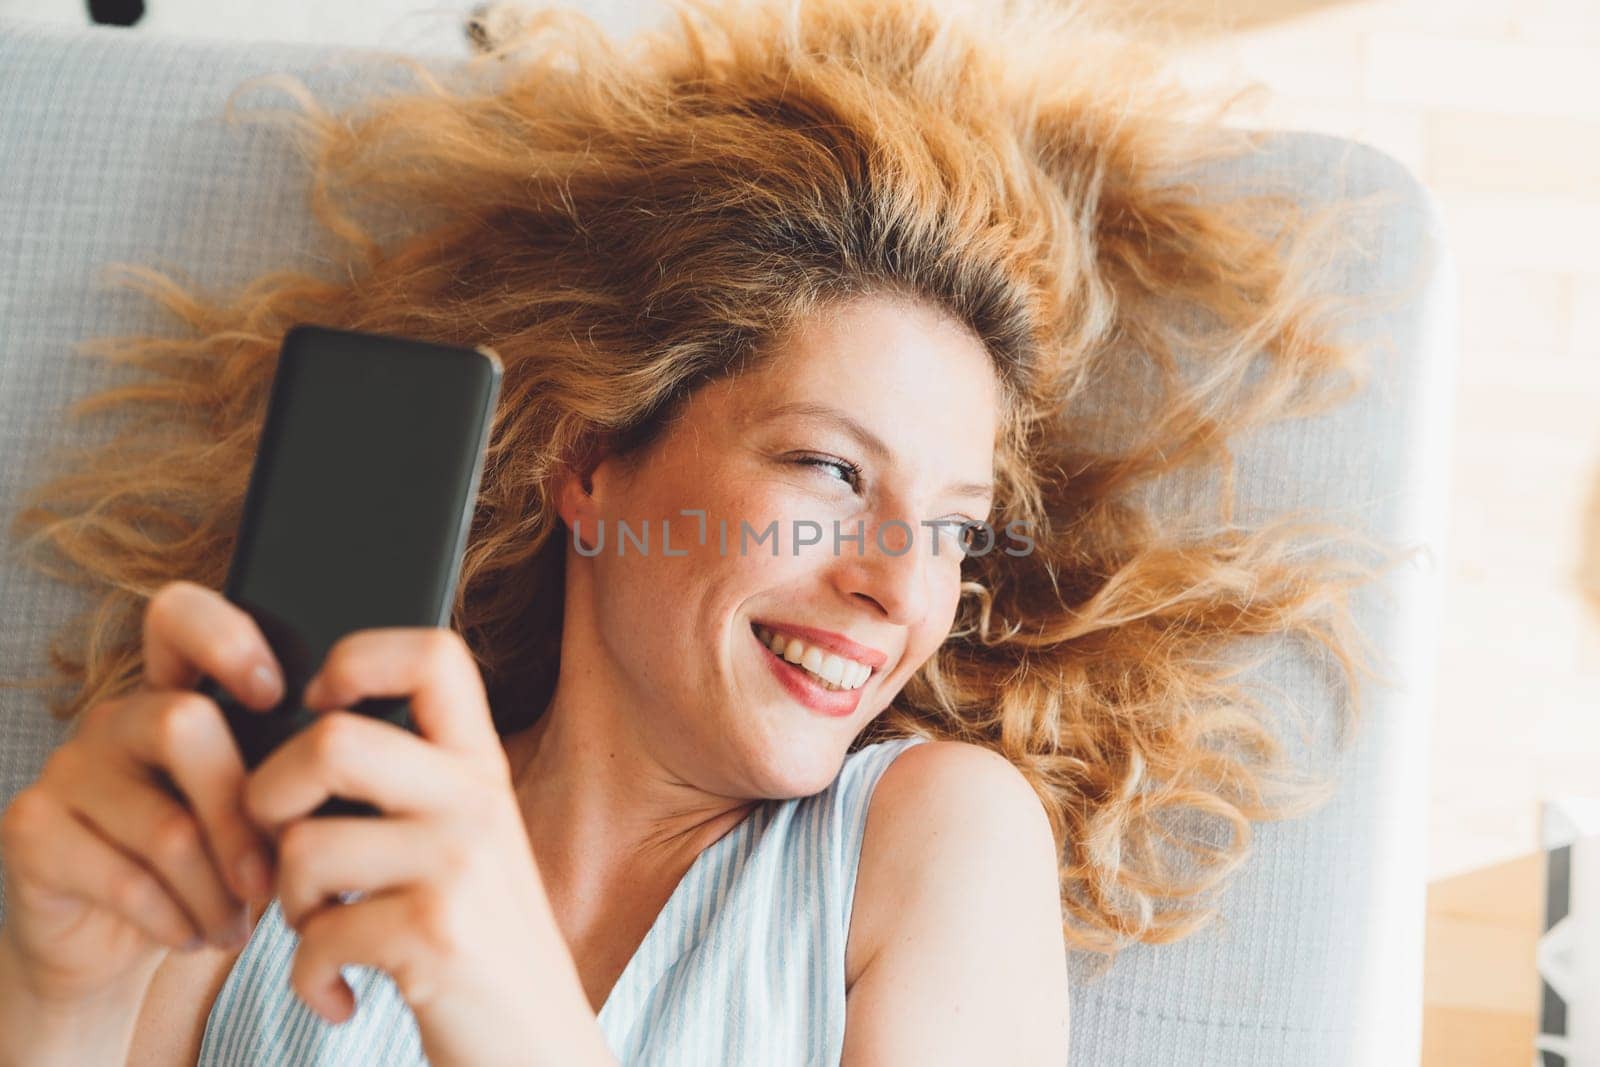 Close up portrait of a woman with curly hair looking away laying down on the couch while holding her phone up in the air taking selfies by VisualProductions